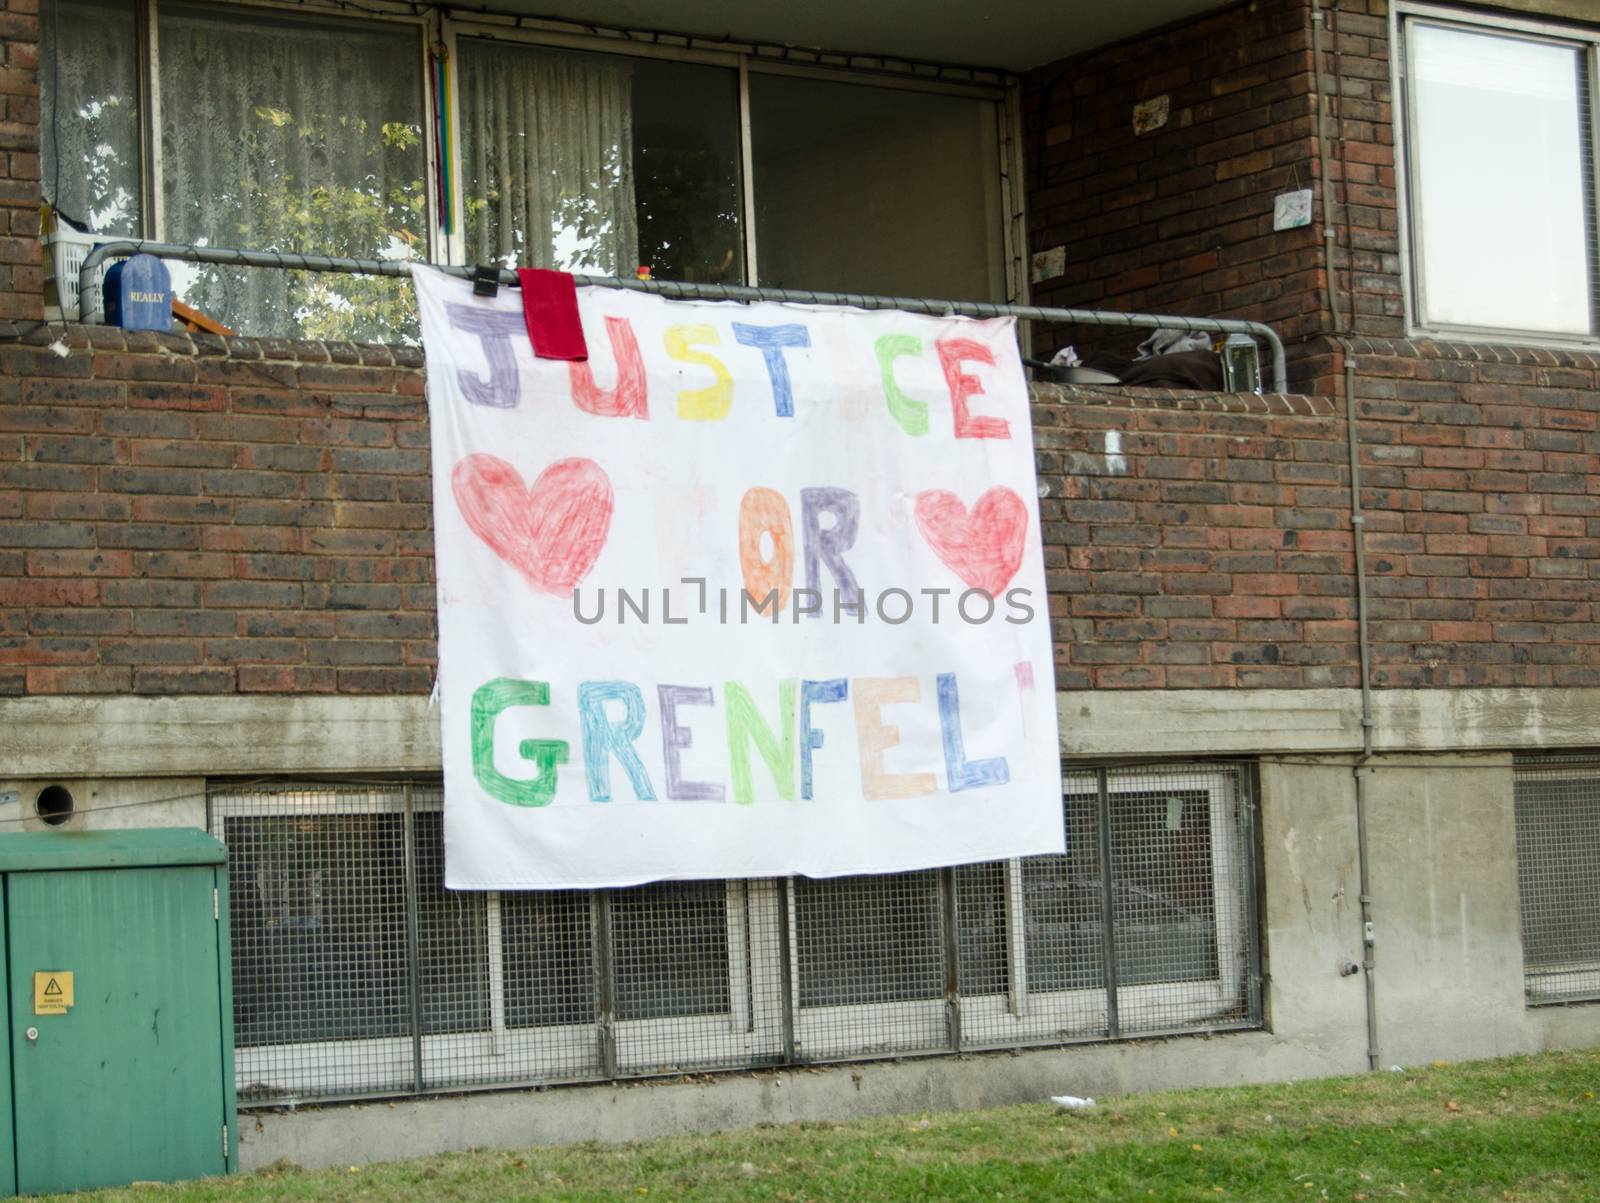 Hand drawn banner calling for Justice for Grenfell displayed on the balcony of a flat next to the Grenfell Tower block in which at least 80 people were killed in a fire, Kensington, London.  